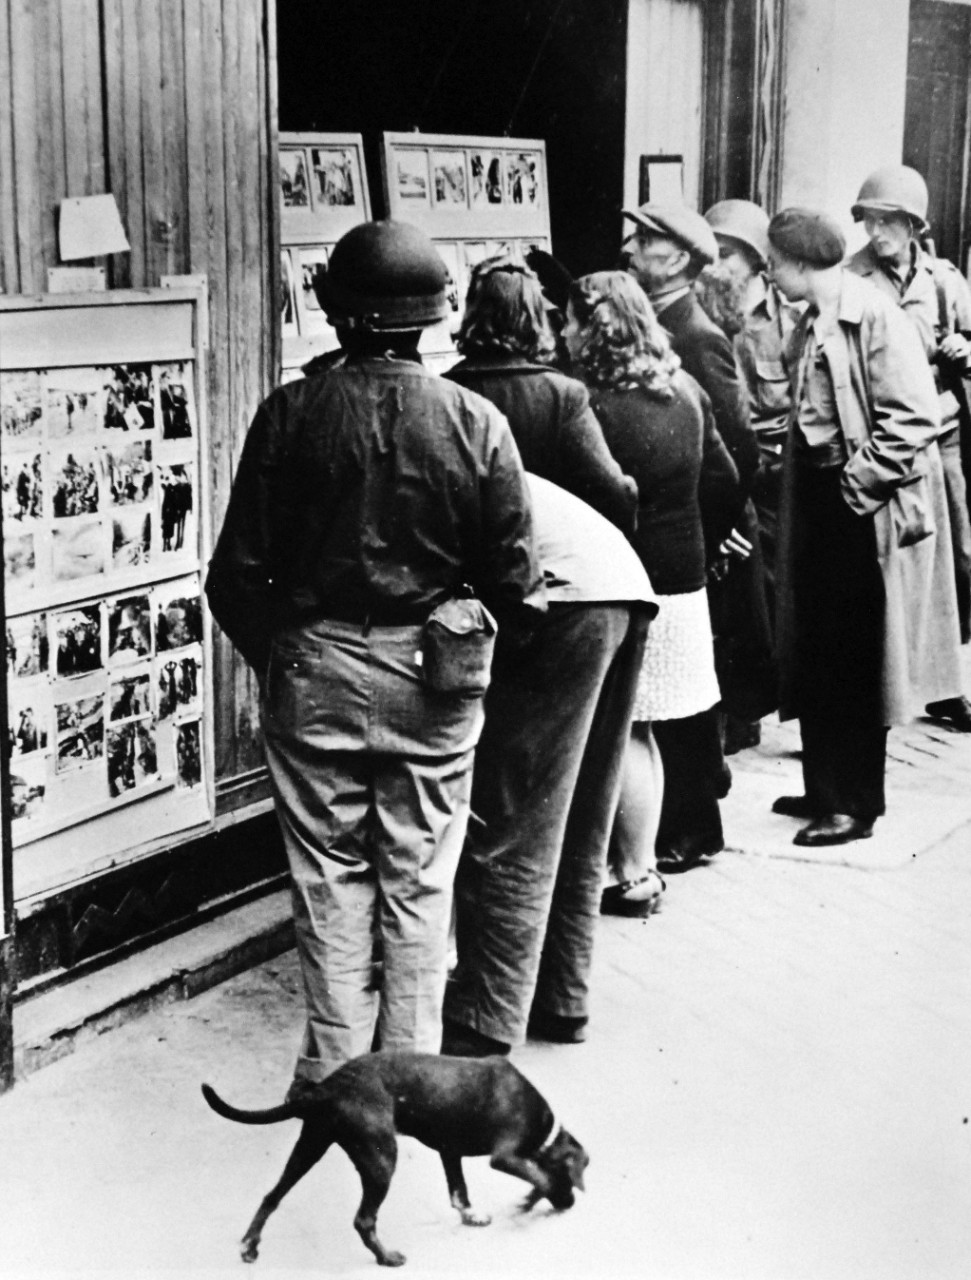 Lot 11611-8:  Liberation of France, Cherbourg, France, Summer 1944.   Crowd gathers before Allied picture display in Cherbourg crowd around a picture display in the windows of the Psychological Warfare Division of the Allied Expeditionary Force.  Cut off from the world during the four years of Nazi occupation, civilians from the Normandy beach village to the great port city were found hungry for news and pictures.   Photographed by U.S. Army Signal Corps.  Office of War Information Photograph.  Courtesy of the Library of Congress.   (2016/02/25)